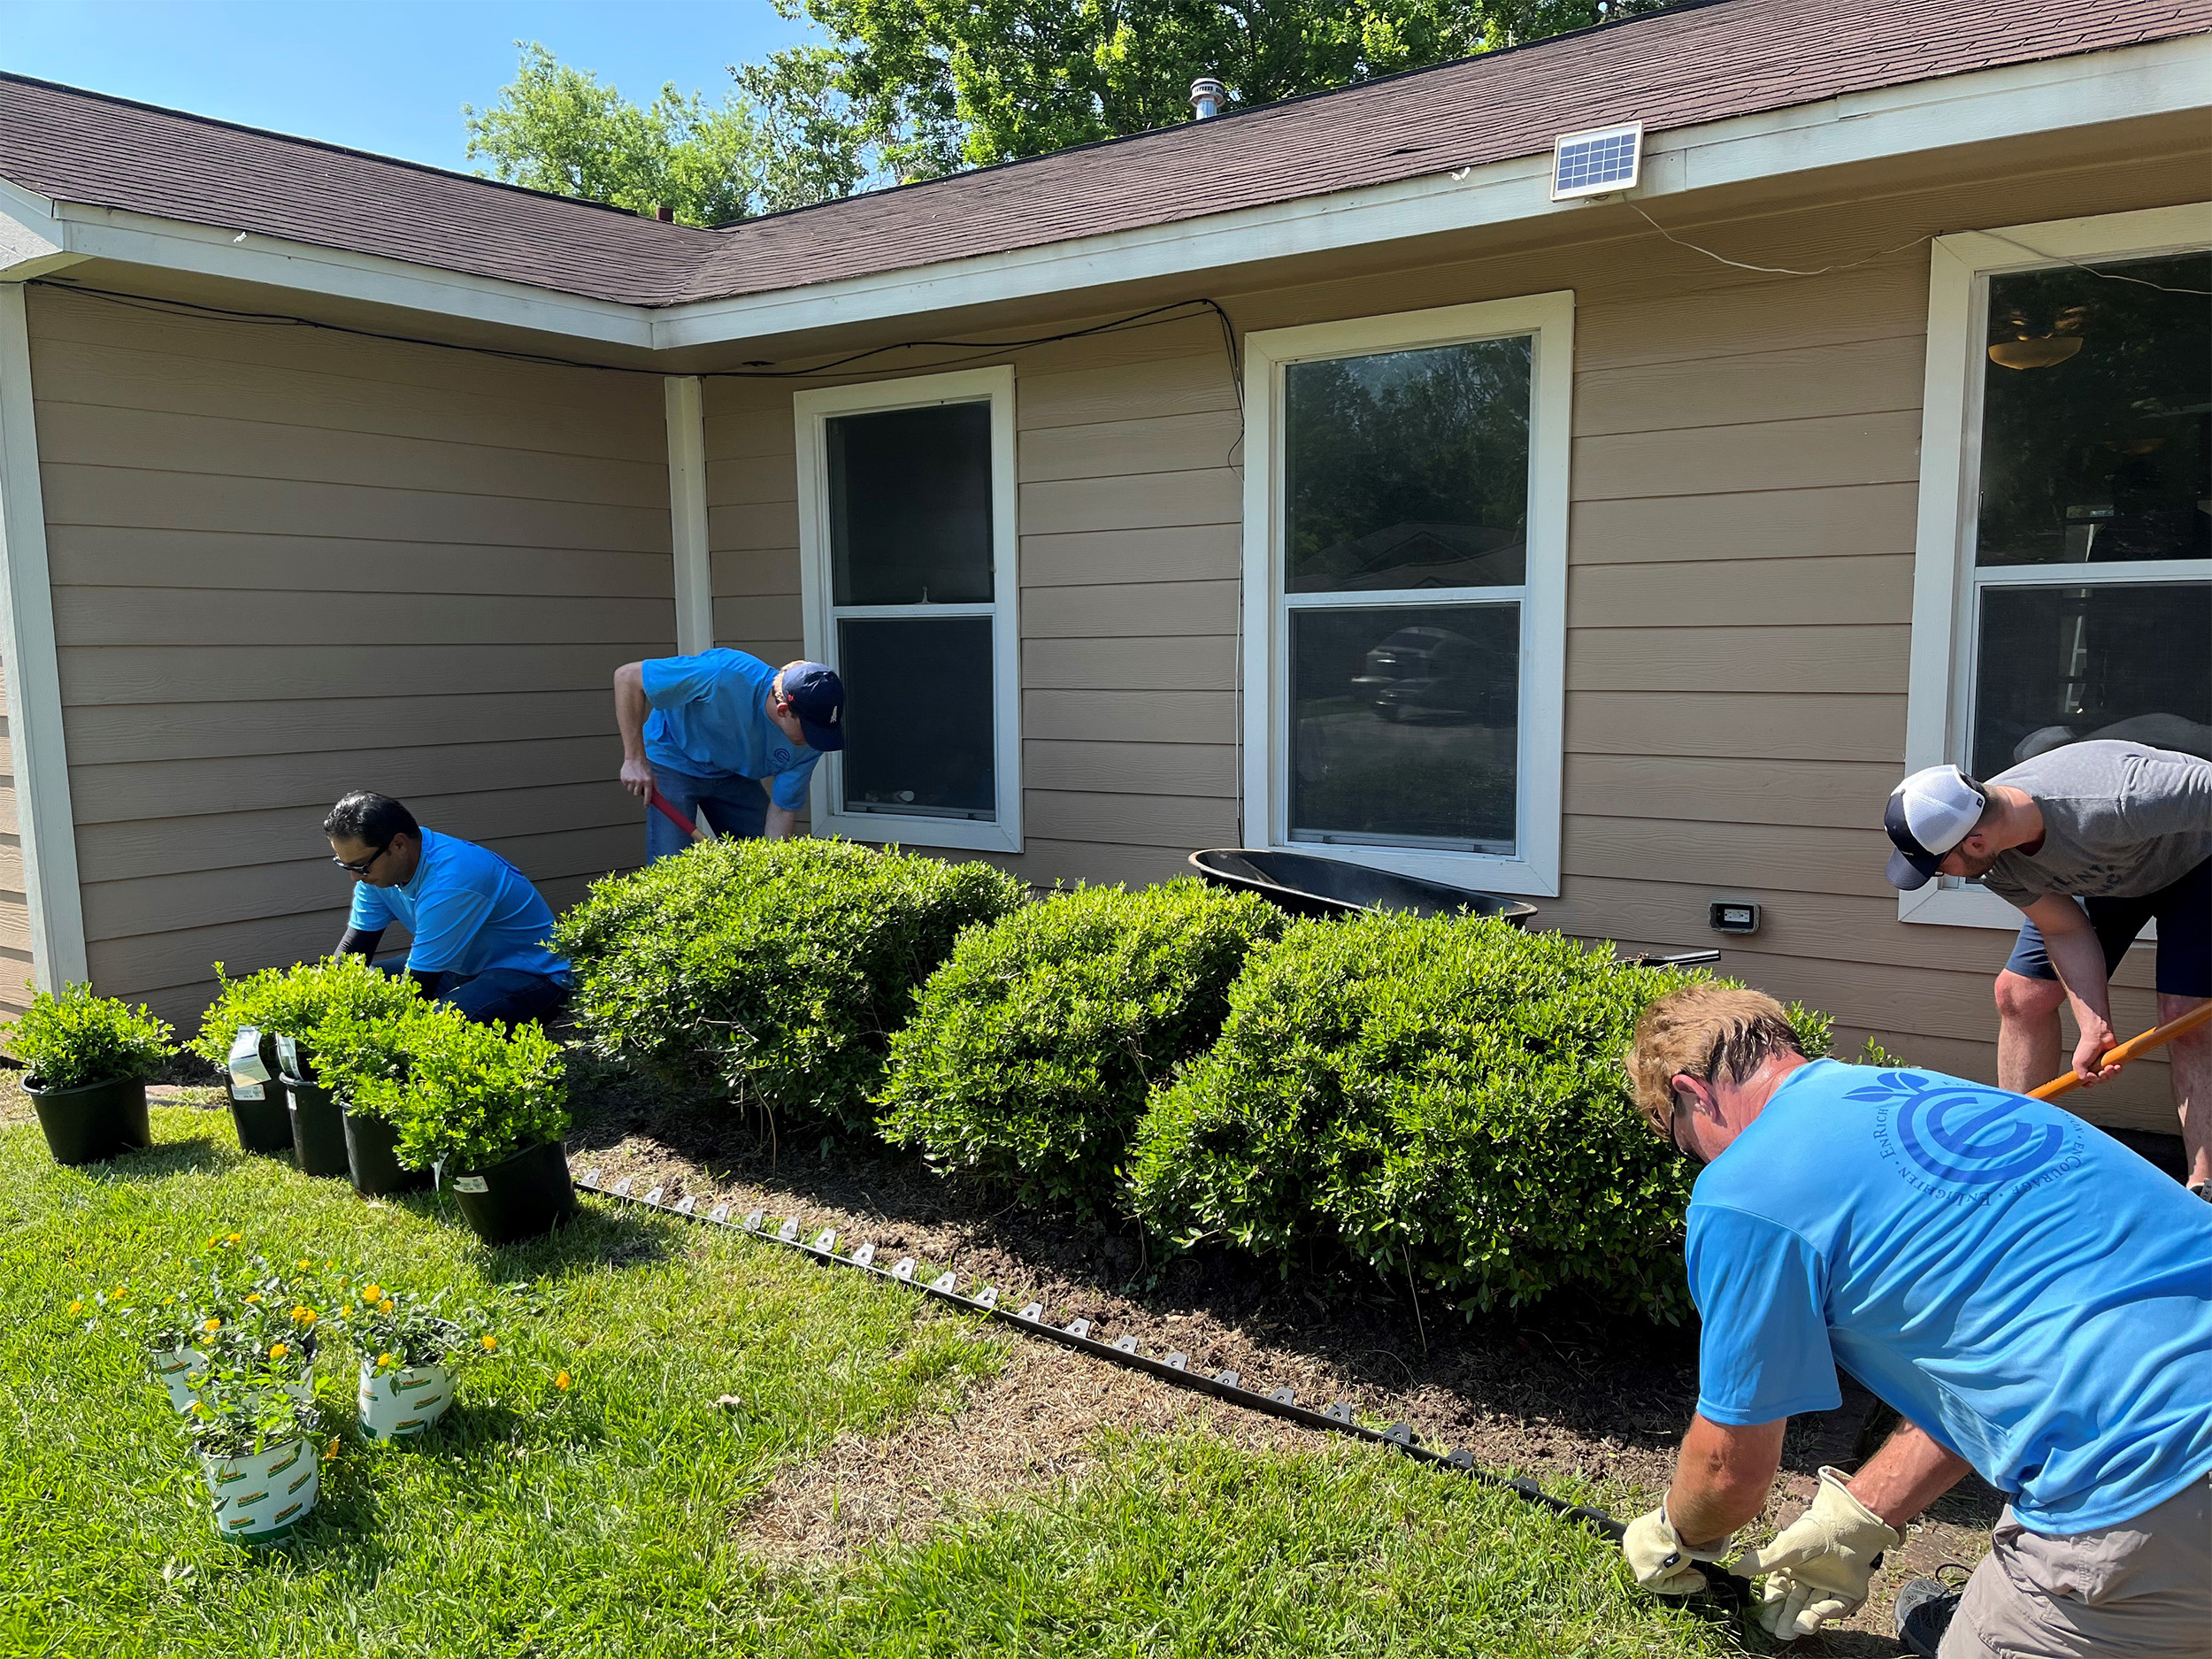 EnCap employees work on landscaping the home’s front yard.